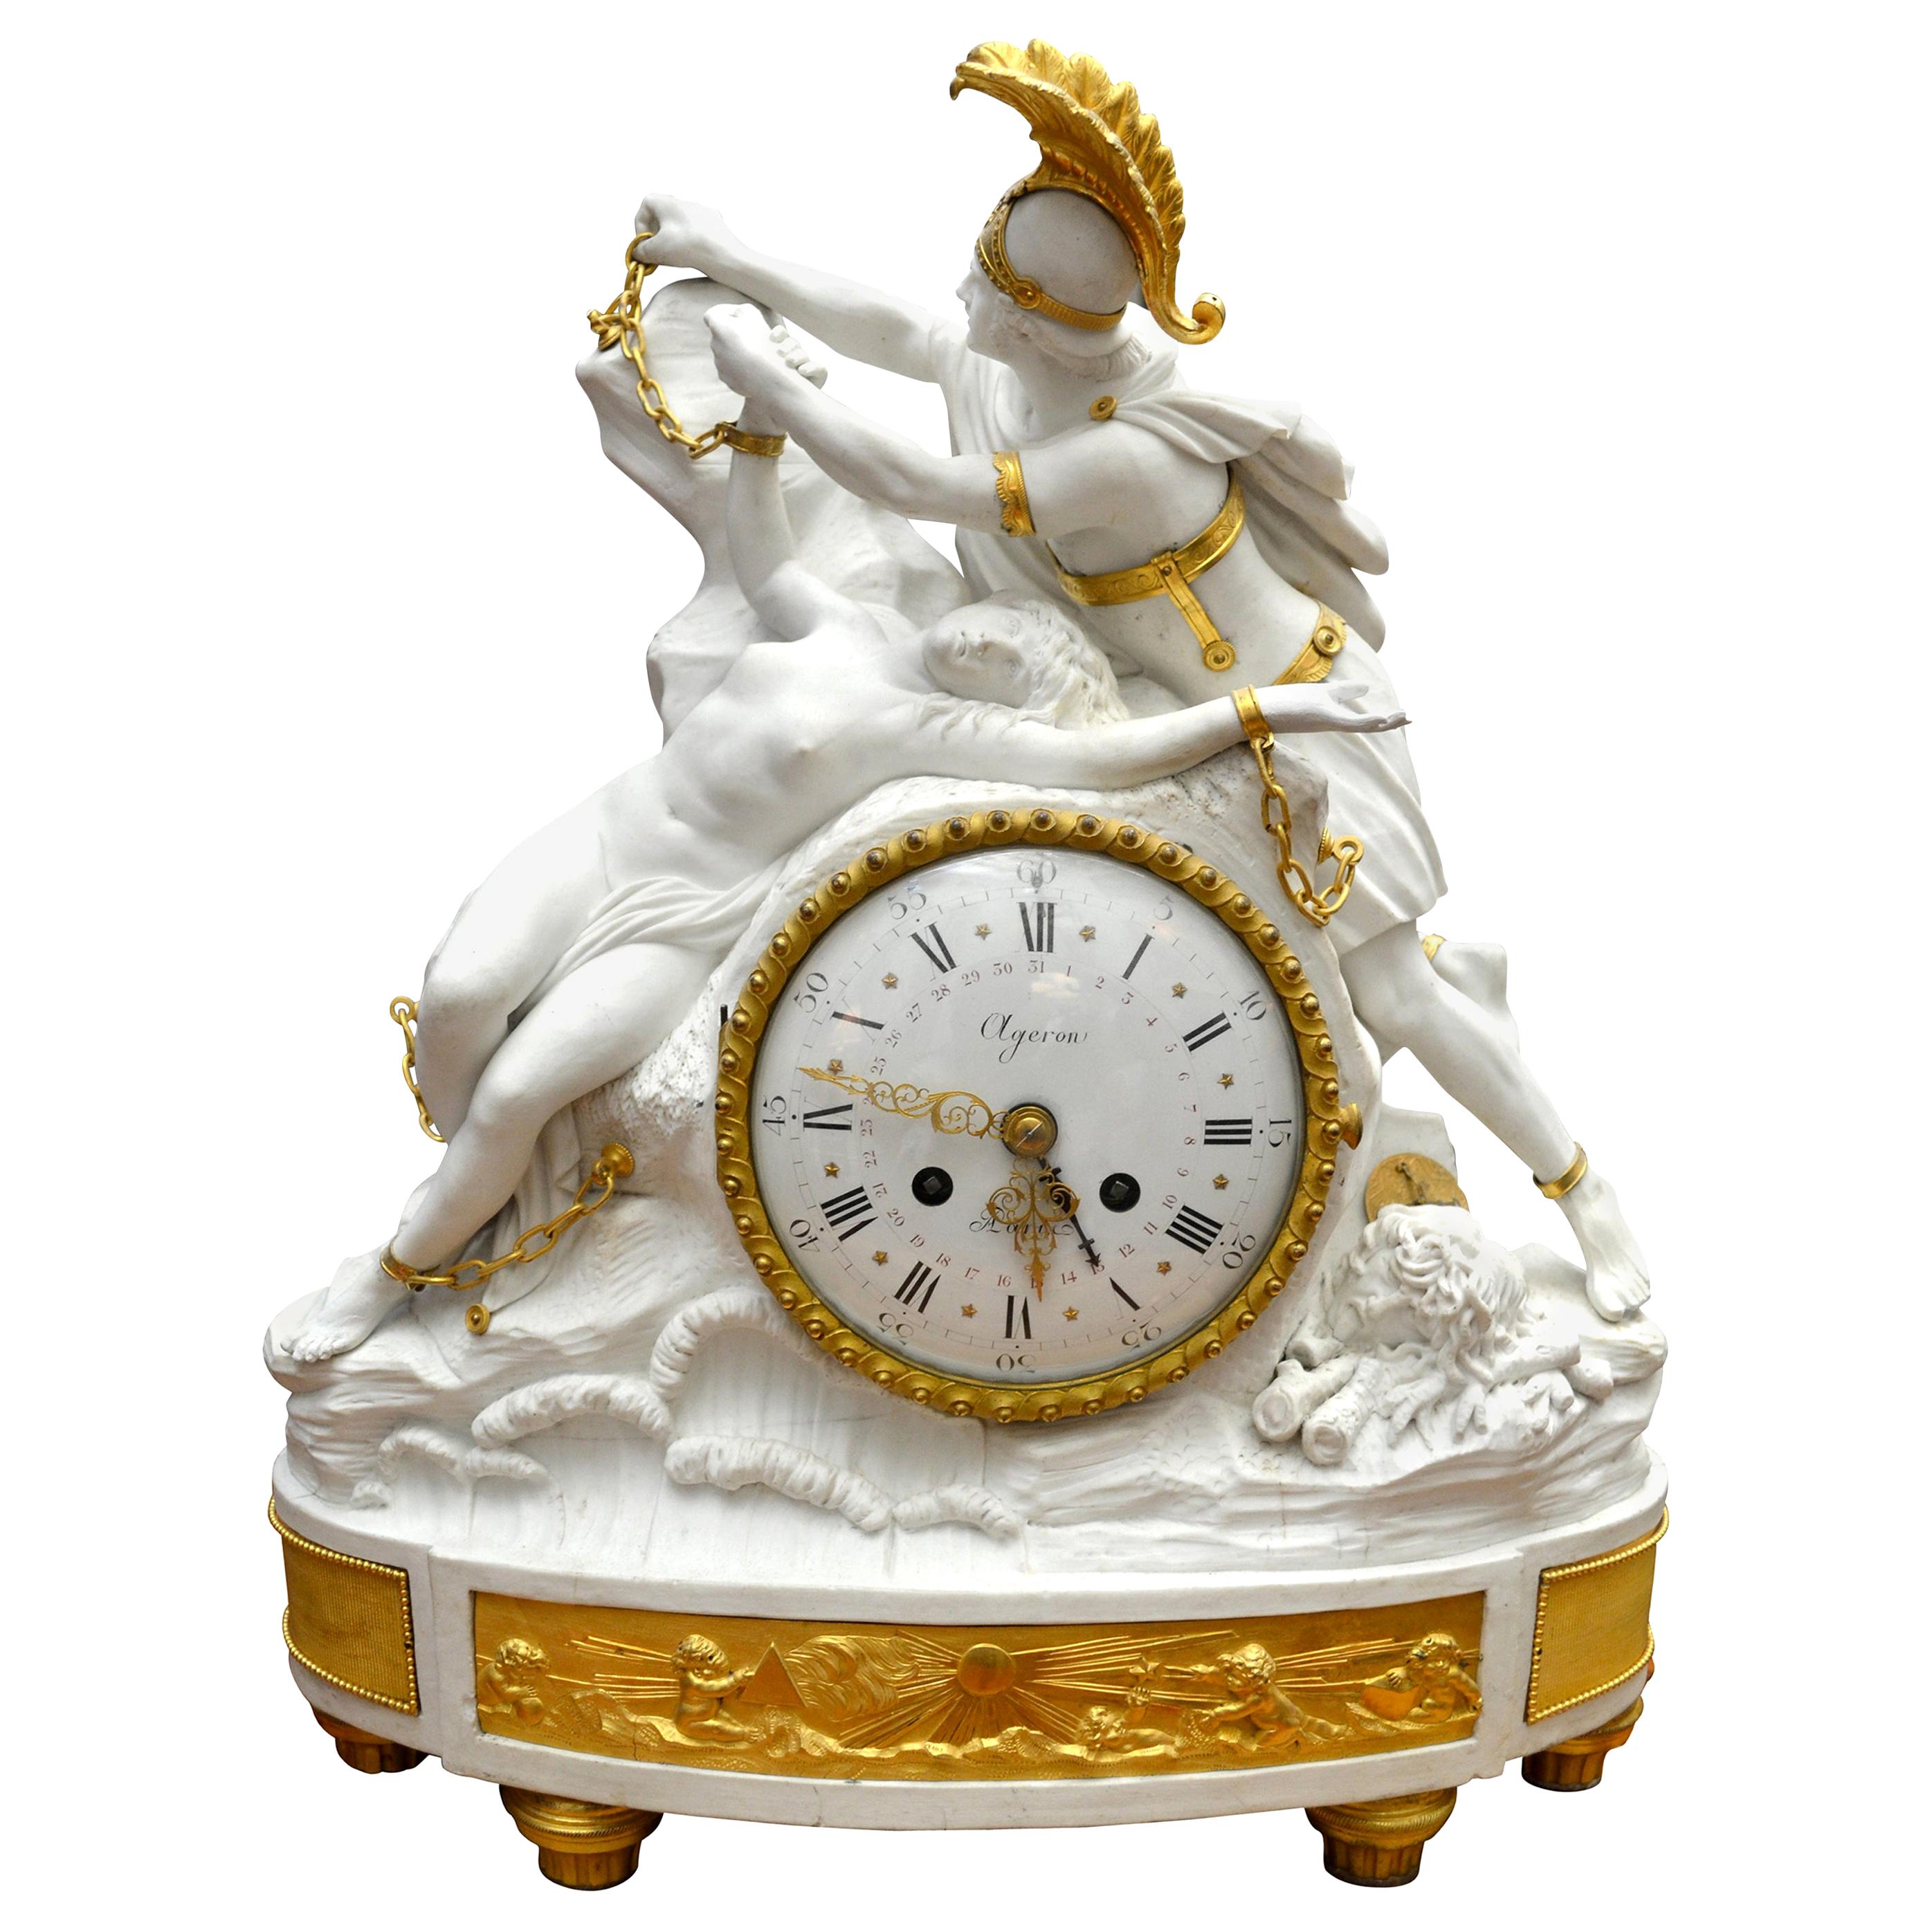 A fine and rare Bisquit porcelain and gilt bronze Louis XV figural clock f depicting a famous scene in Greek Mythology of Perseus freeing Andromeda. The clock case is made of Bisquit (unglazed) porcelain. The figural group is presented on a rocky